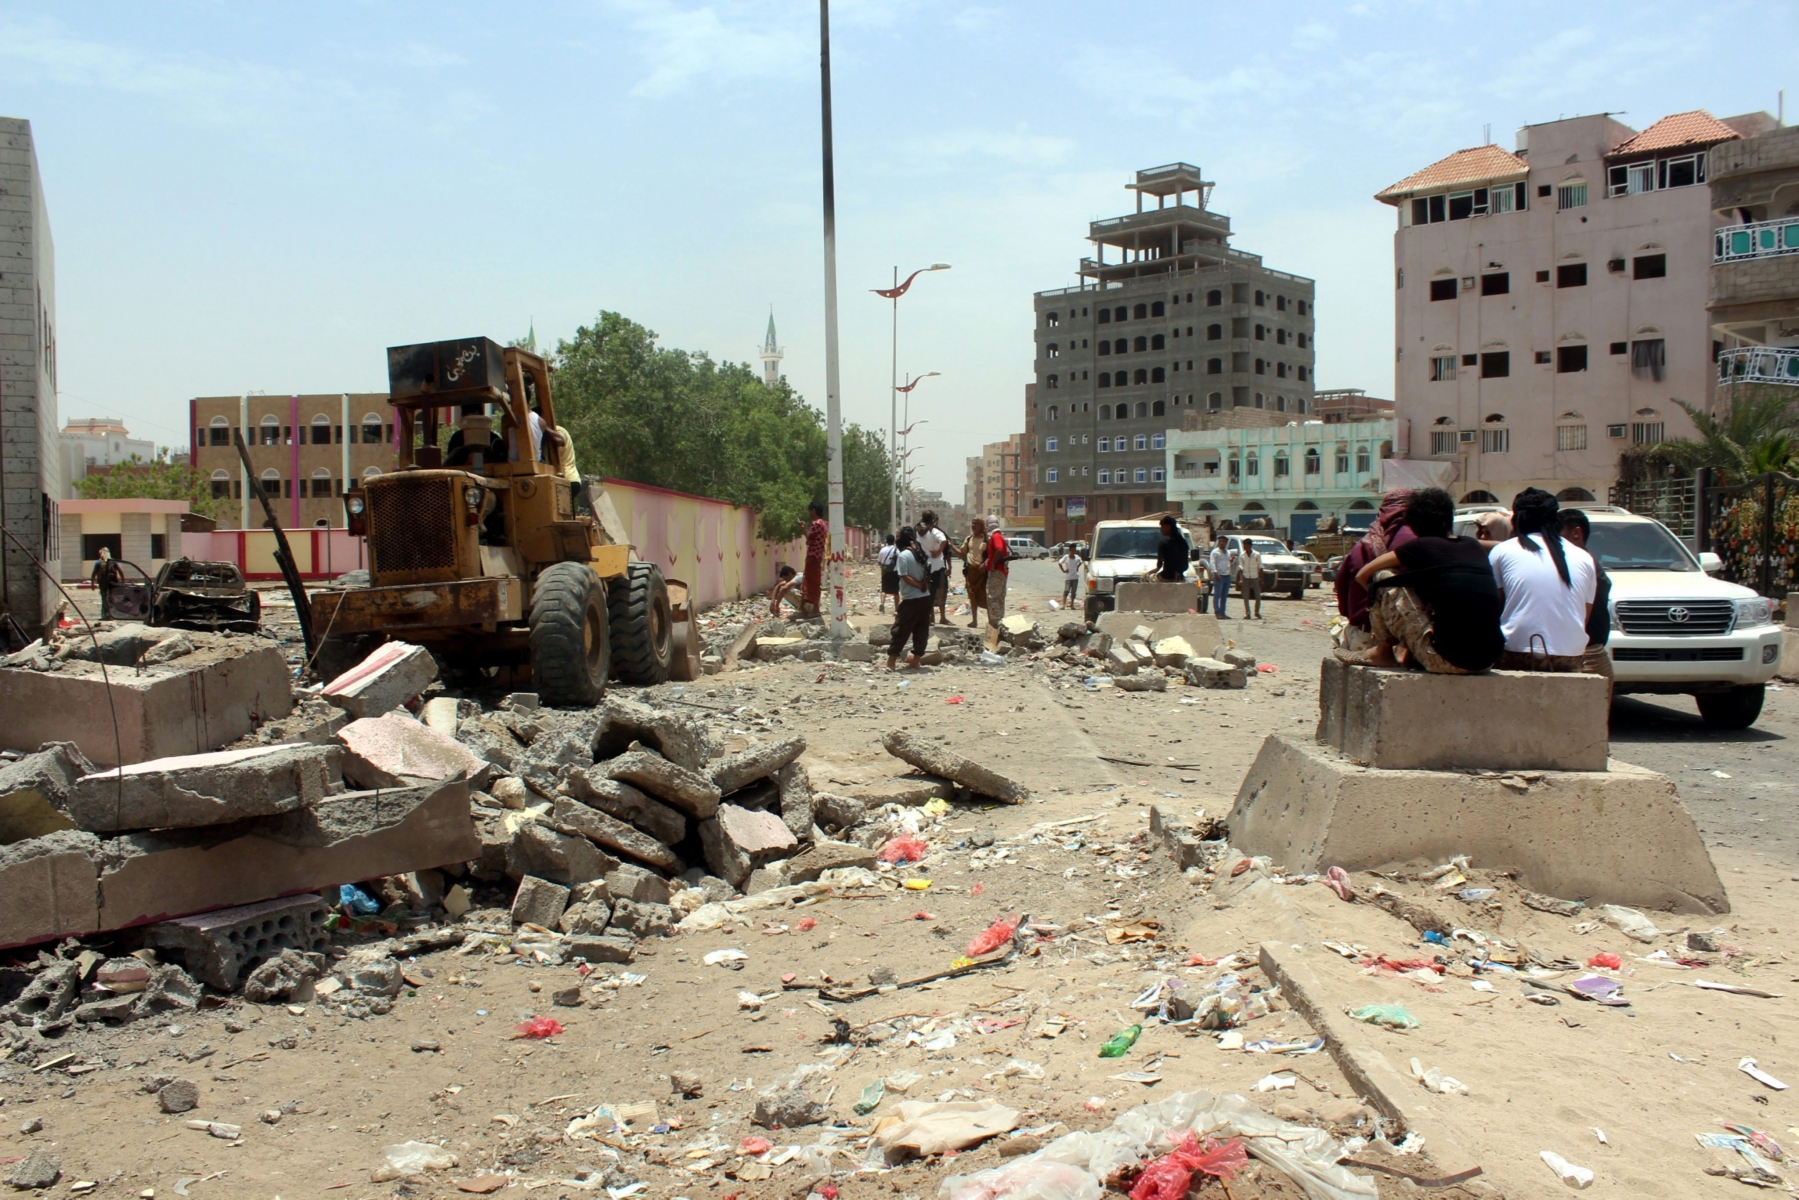 epa05513959 Yemenis inspect the site of a suicide bombing targeting a recruitment center in the southern port city of Aden, Yemen, 29 August 2016. According to reports, at least 60 people were killed by an Islamic State (IS) suicide bomber who drove an explosive car into a recruitment center run by pro-government militias in the southern Yemeni city of Aden.  EPA/STR YEMEN ADEN SUICIDE BOMBING